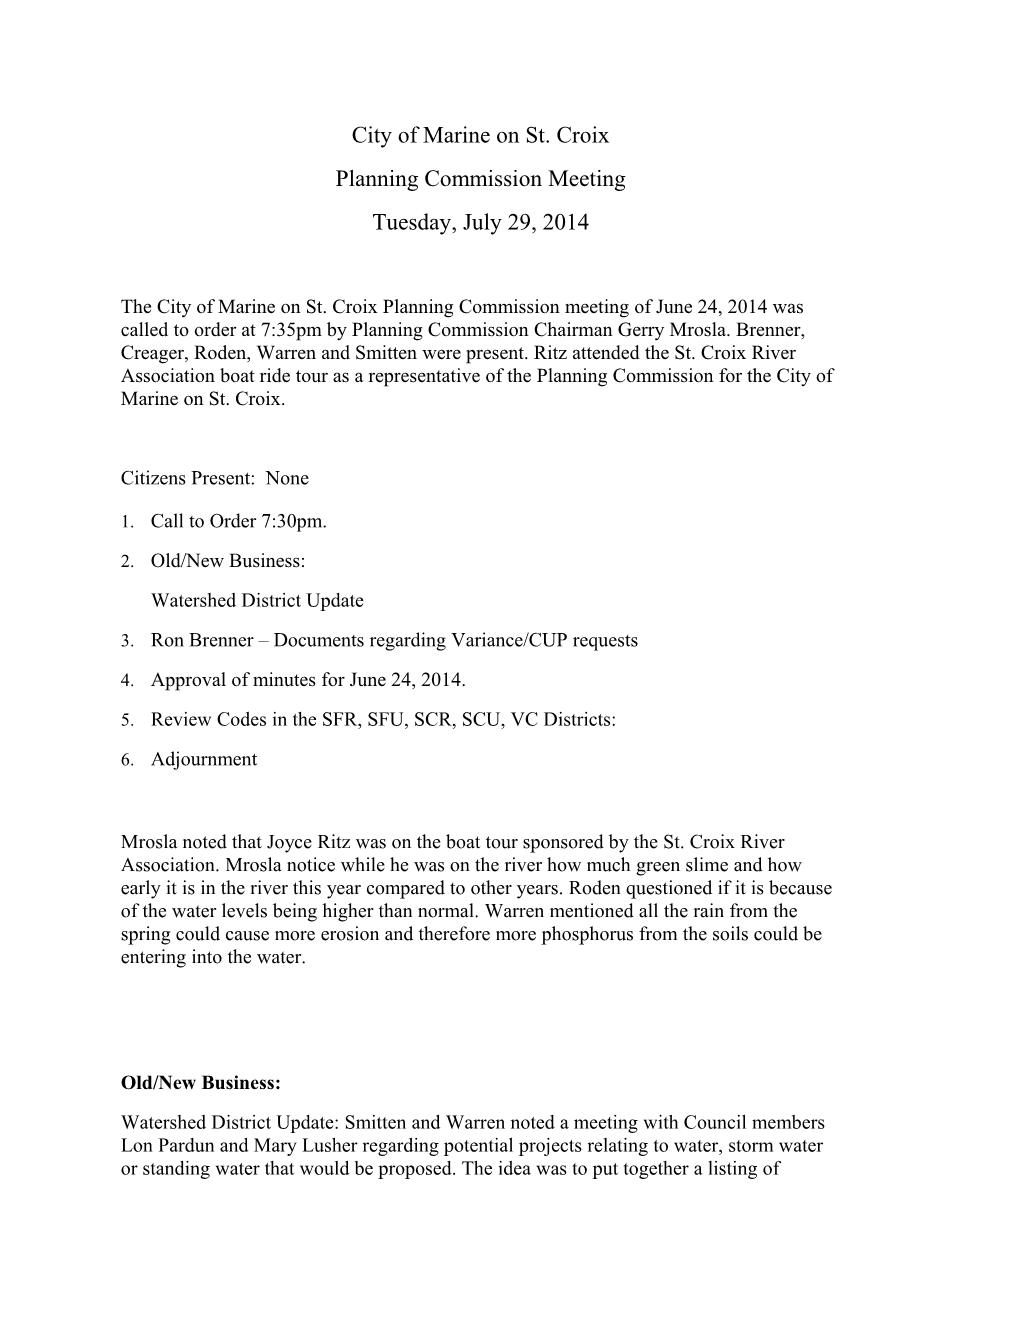 Planning Commissionmeeting